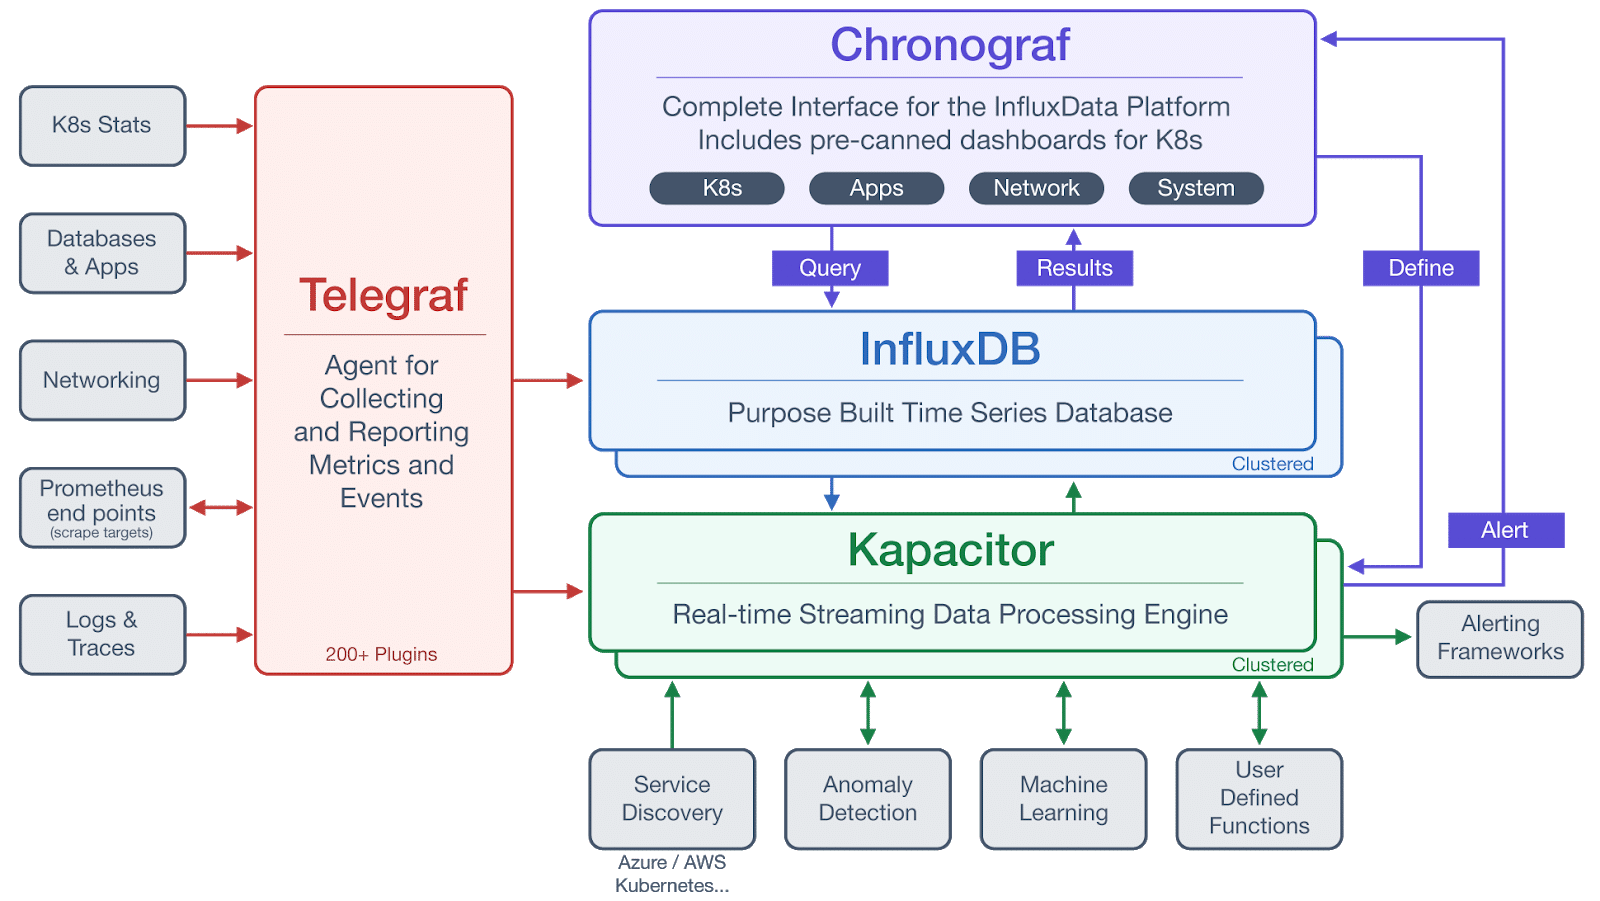 the architecture of the TICK Stack, including Telegraf, InfluxDB, Chronograf, and Kapacitor